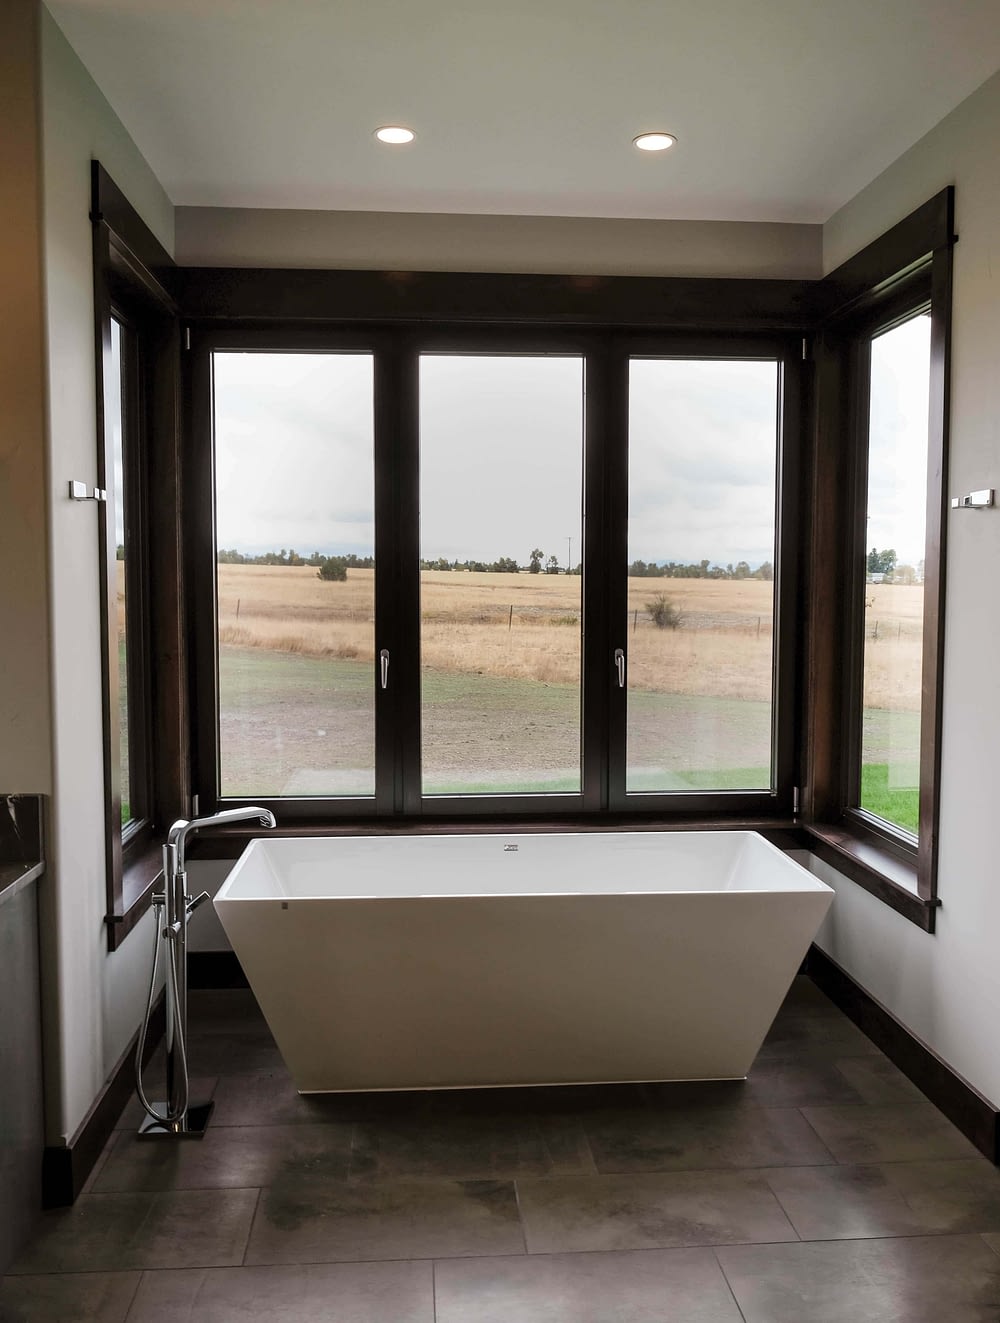 Parade of Homes bathroom with large tub surrounded by windows